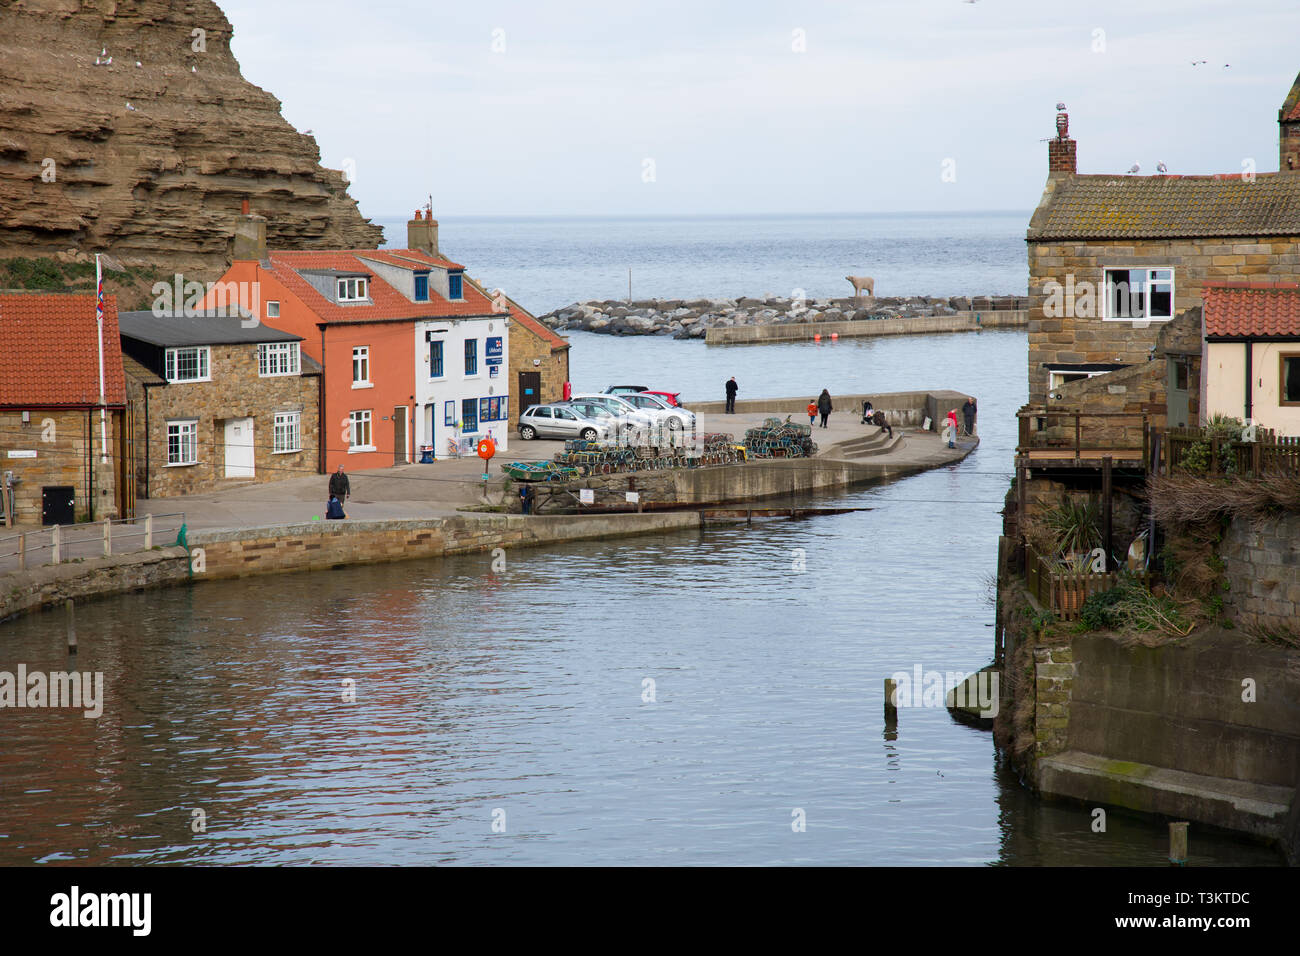 A view of the harbour and fishermens cottages in Staithes, a traditional fishing village and seaside resort on the North Yorkshire coast, England UK. Stock Photo